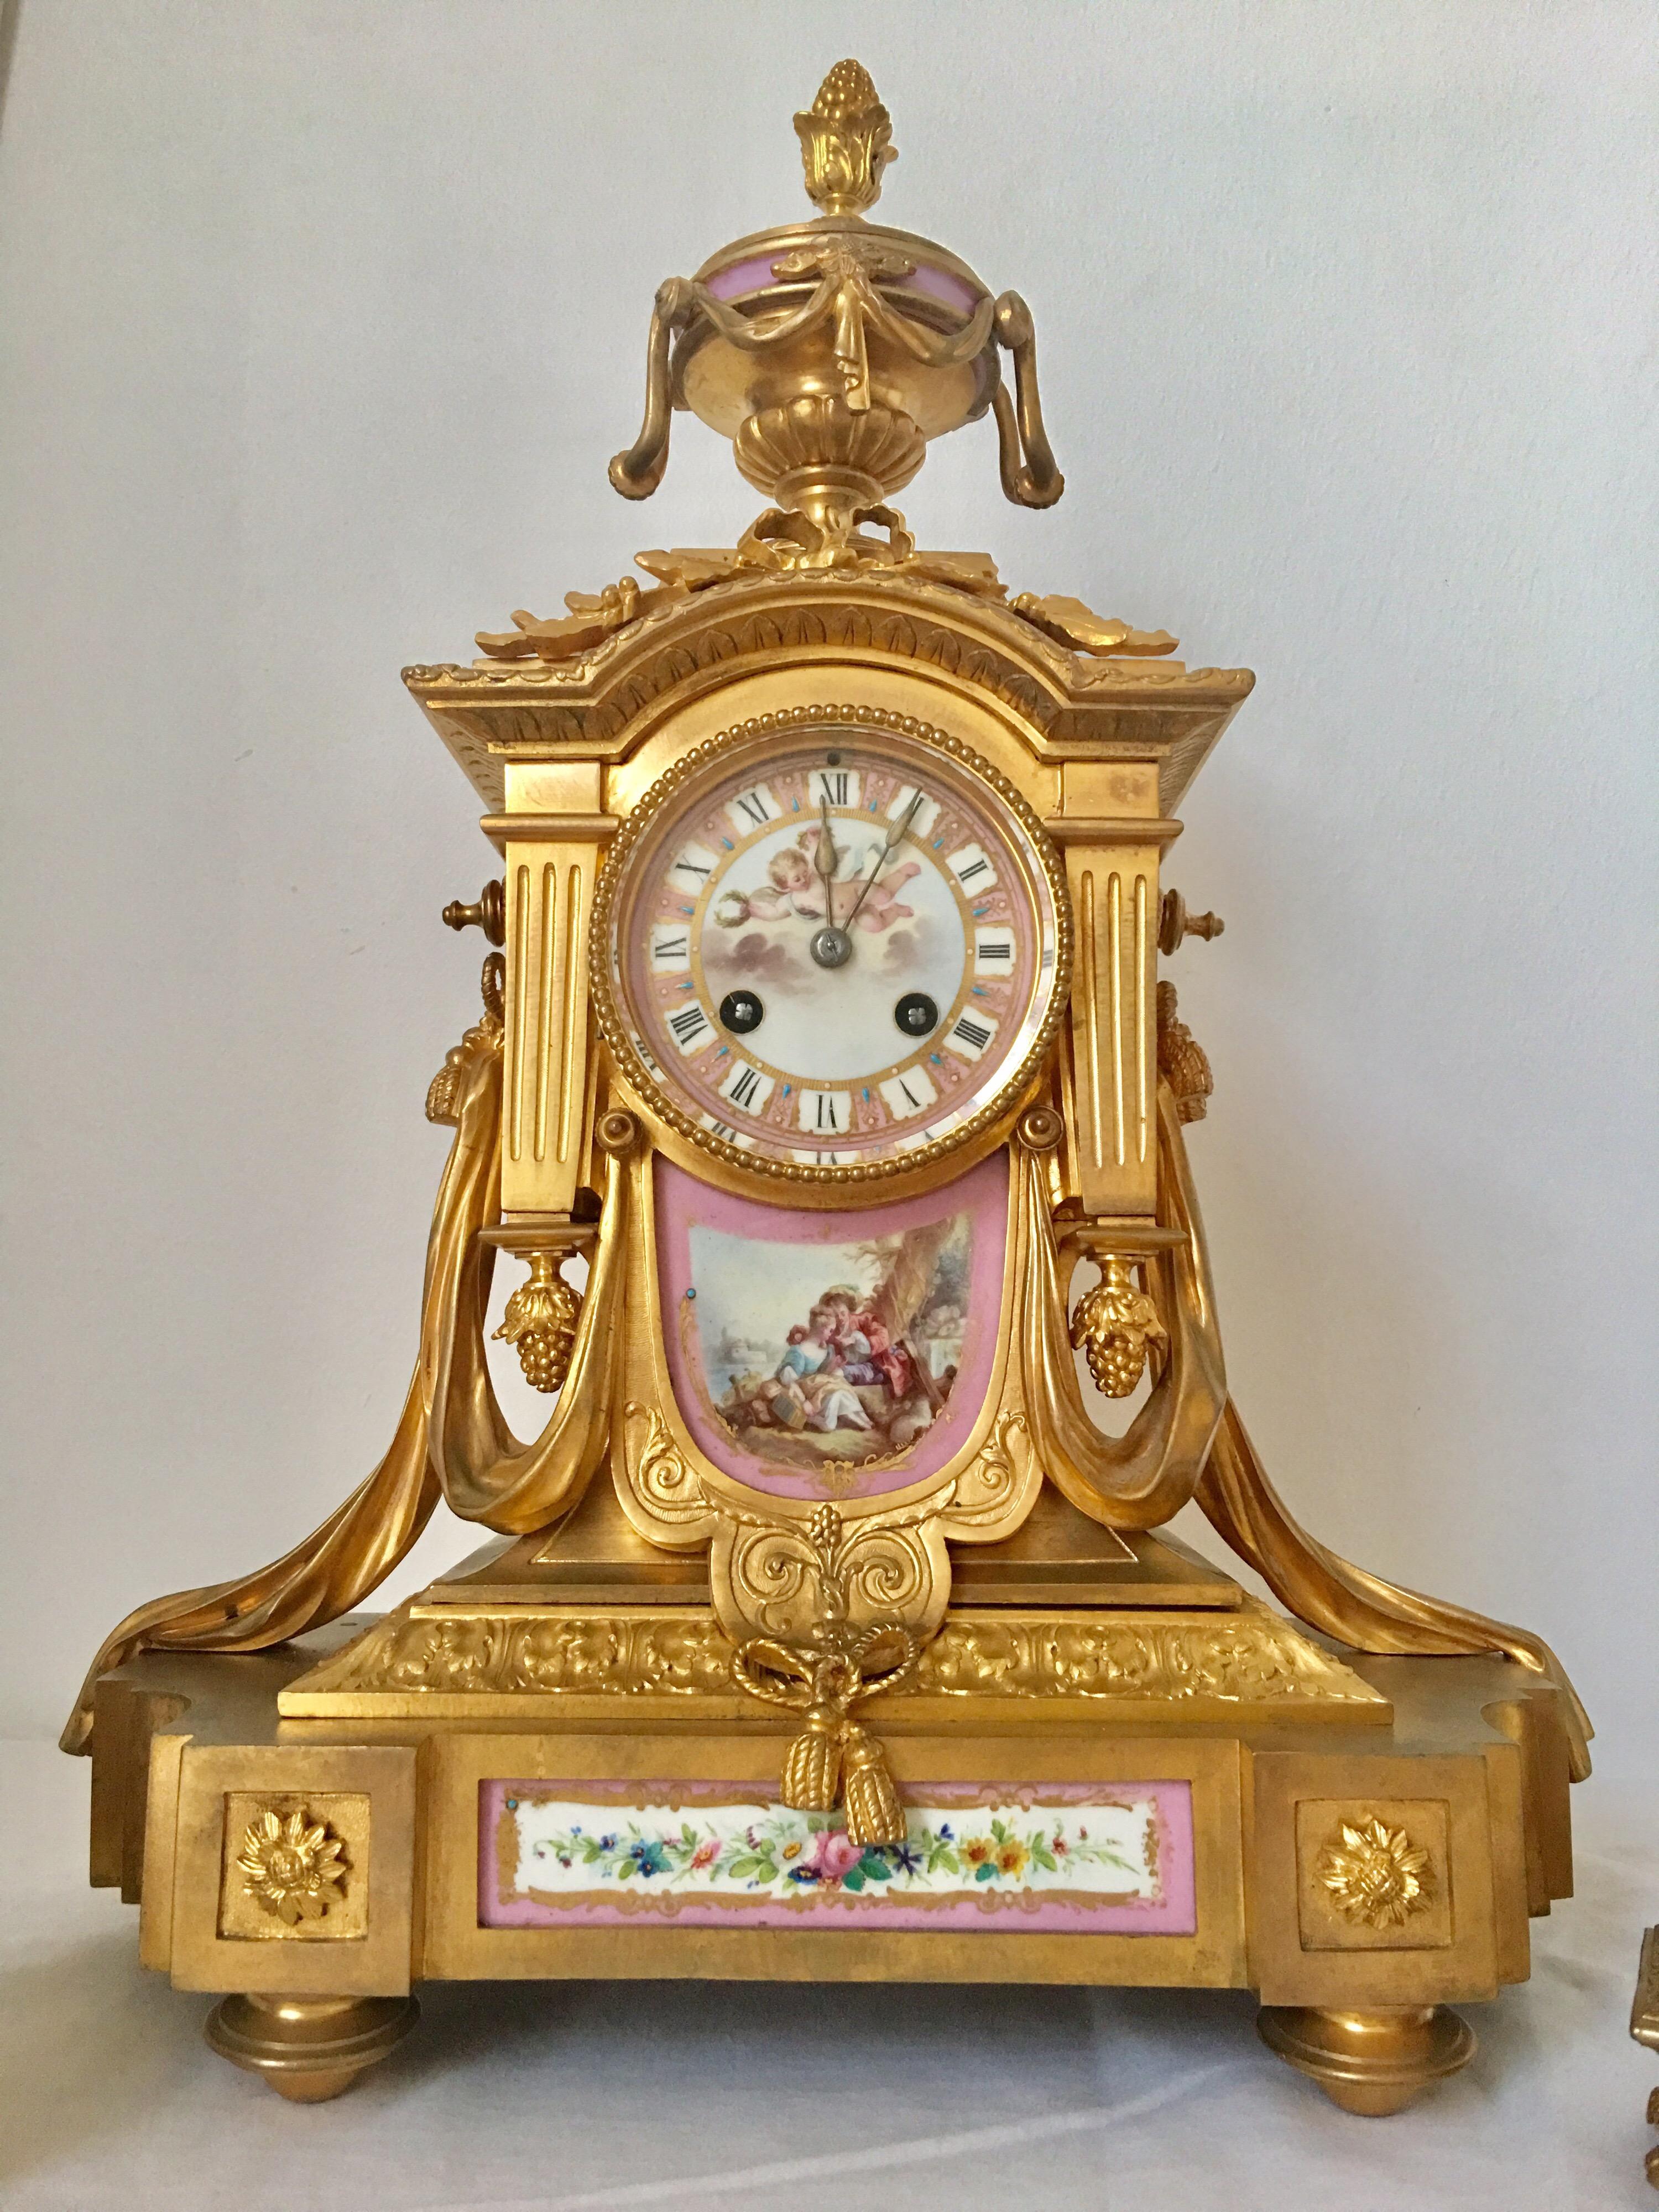 This stunning 3 pcs. Set pink porcelain & ormolu French clock signed by Japy Freres & Co. and retailed by Howell James & Co. To the Queen is working and ticking well. It strikes every hour and half an hour on a bell, circa 1860.